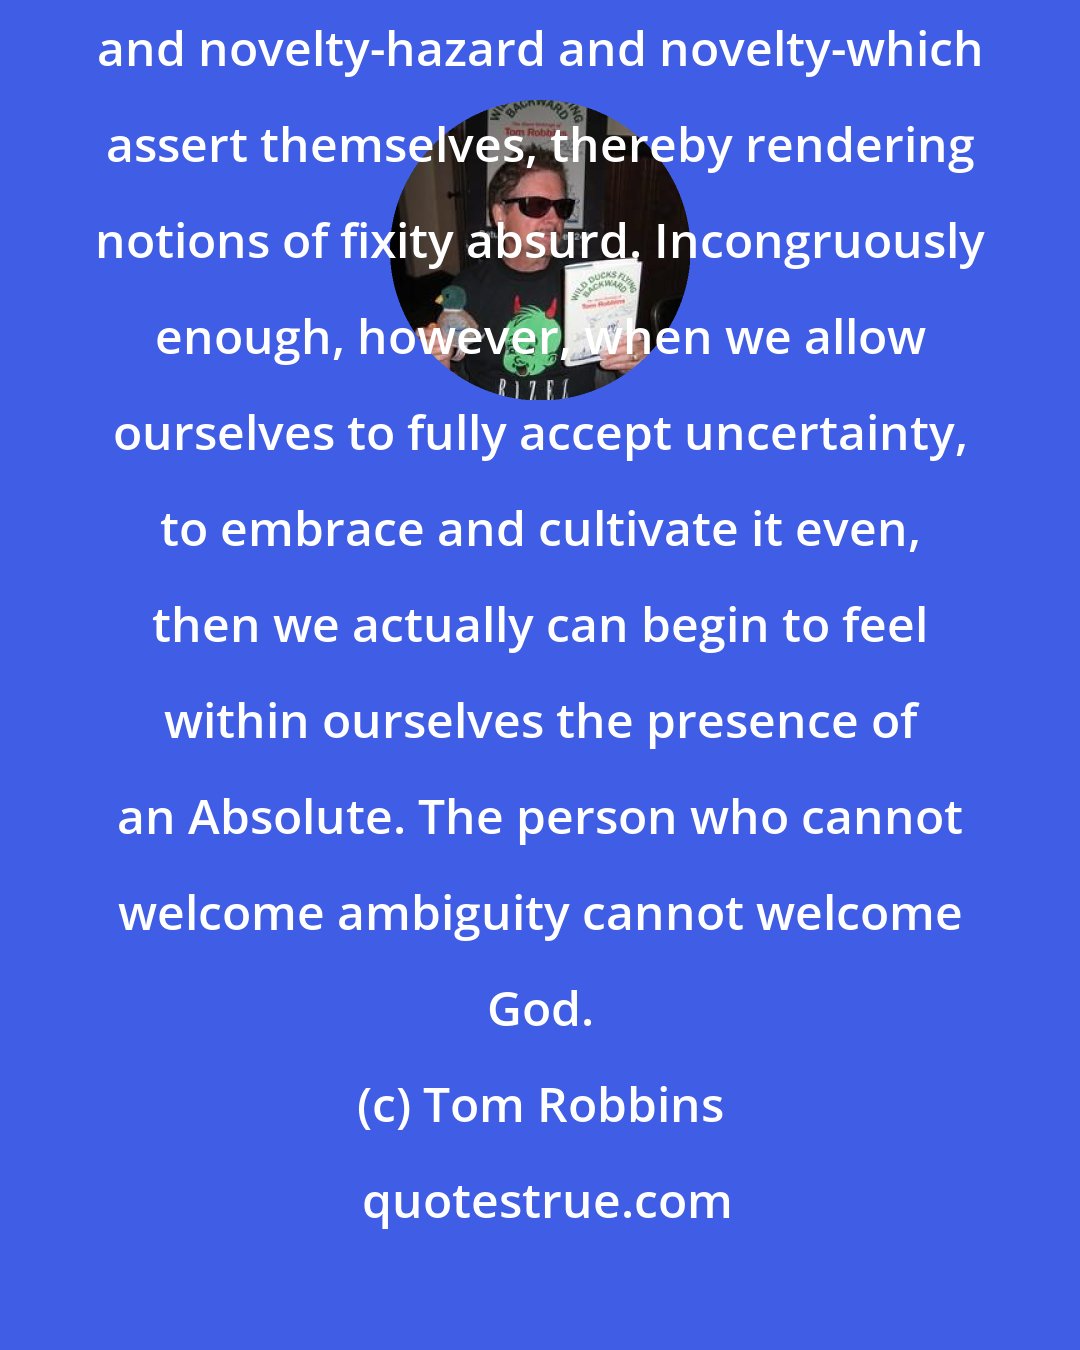 Tom Robbins: In this world that God (or Mother Nature) created, it is always hazard and novelty-hazard and novelty-which assert themselves, thereby rendering notions of fixity absurd. Incongruously enough, however, when we allow ourselves to fully accept uncertainty, to embrace and cultivate it even, then we actually can begin to feel within ourselves the presence of an Absolute. The person who cannot welcome ambiguity cannot welcome God.